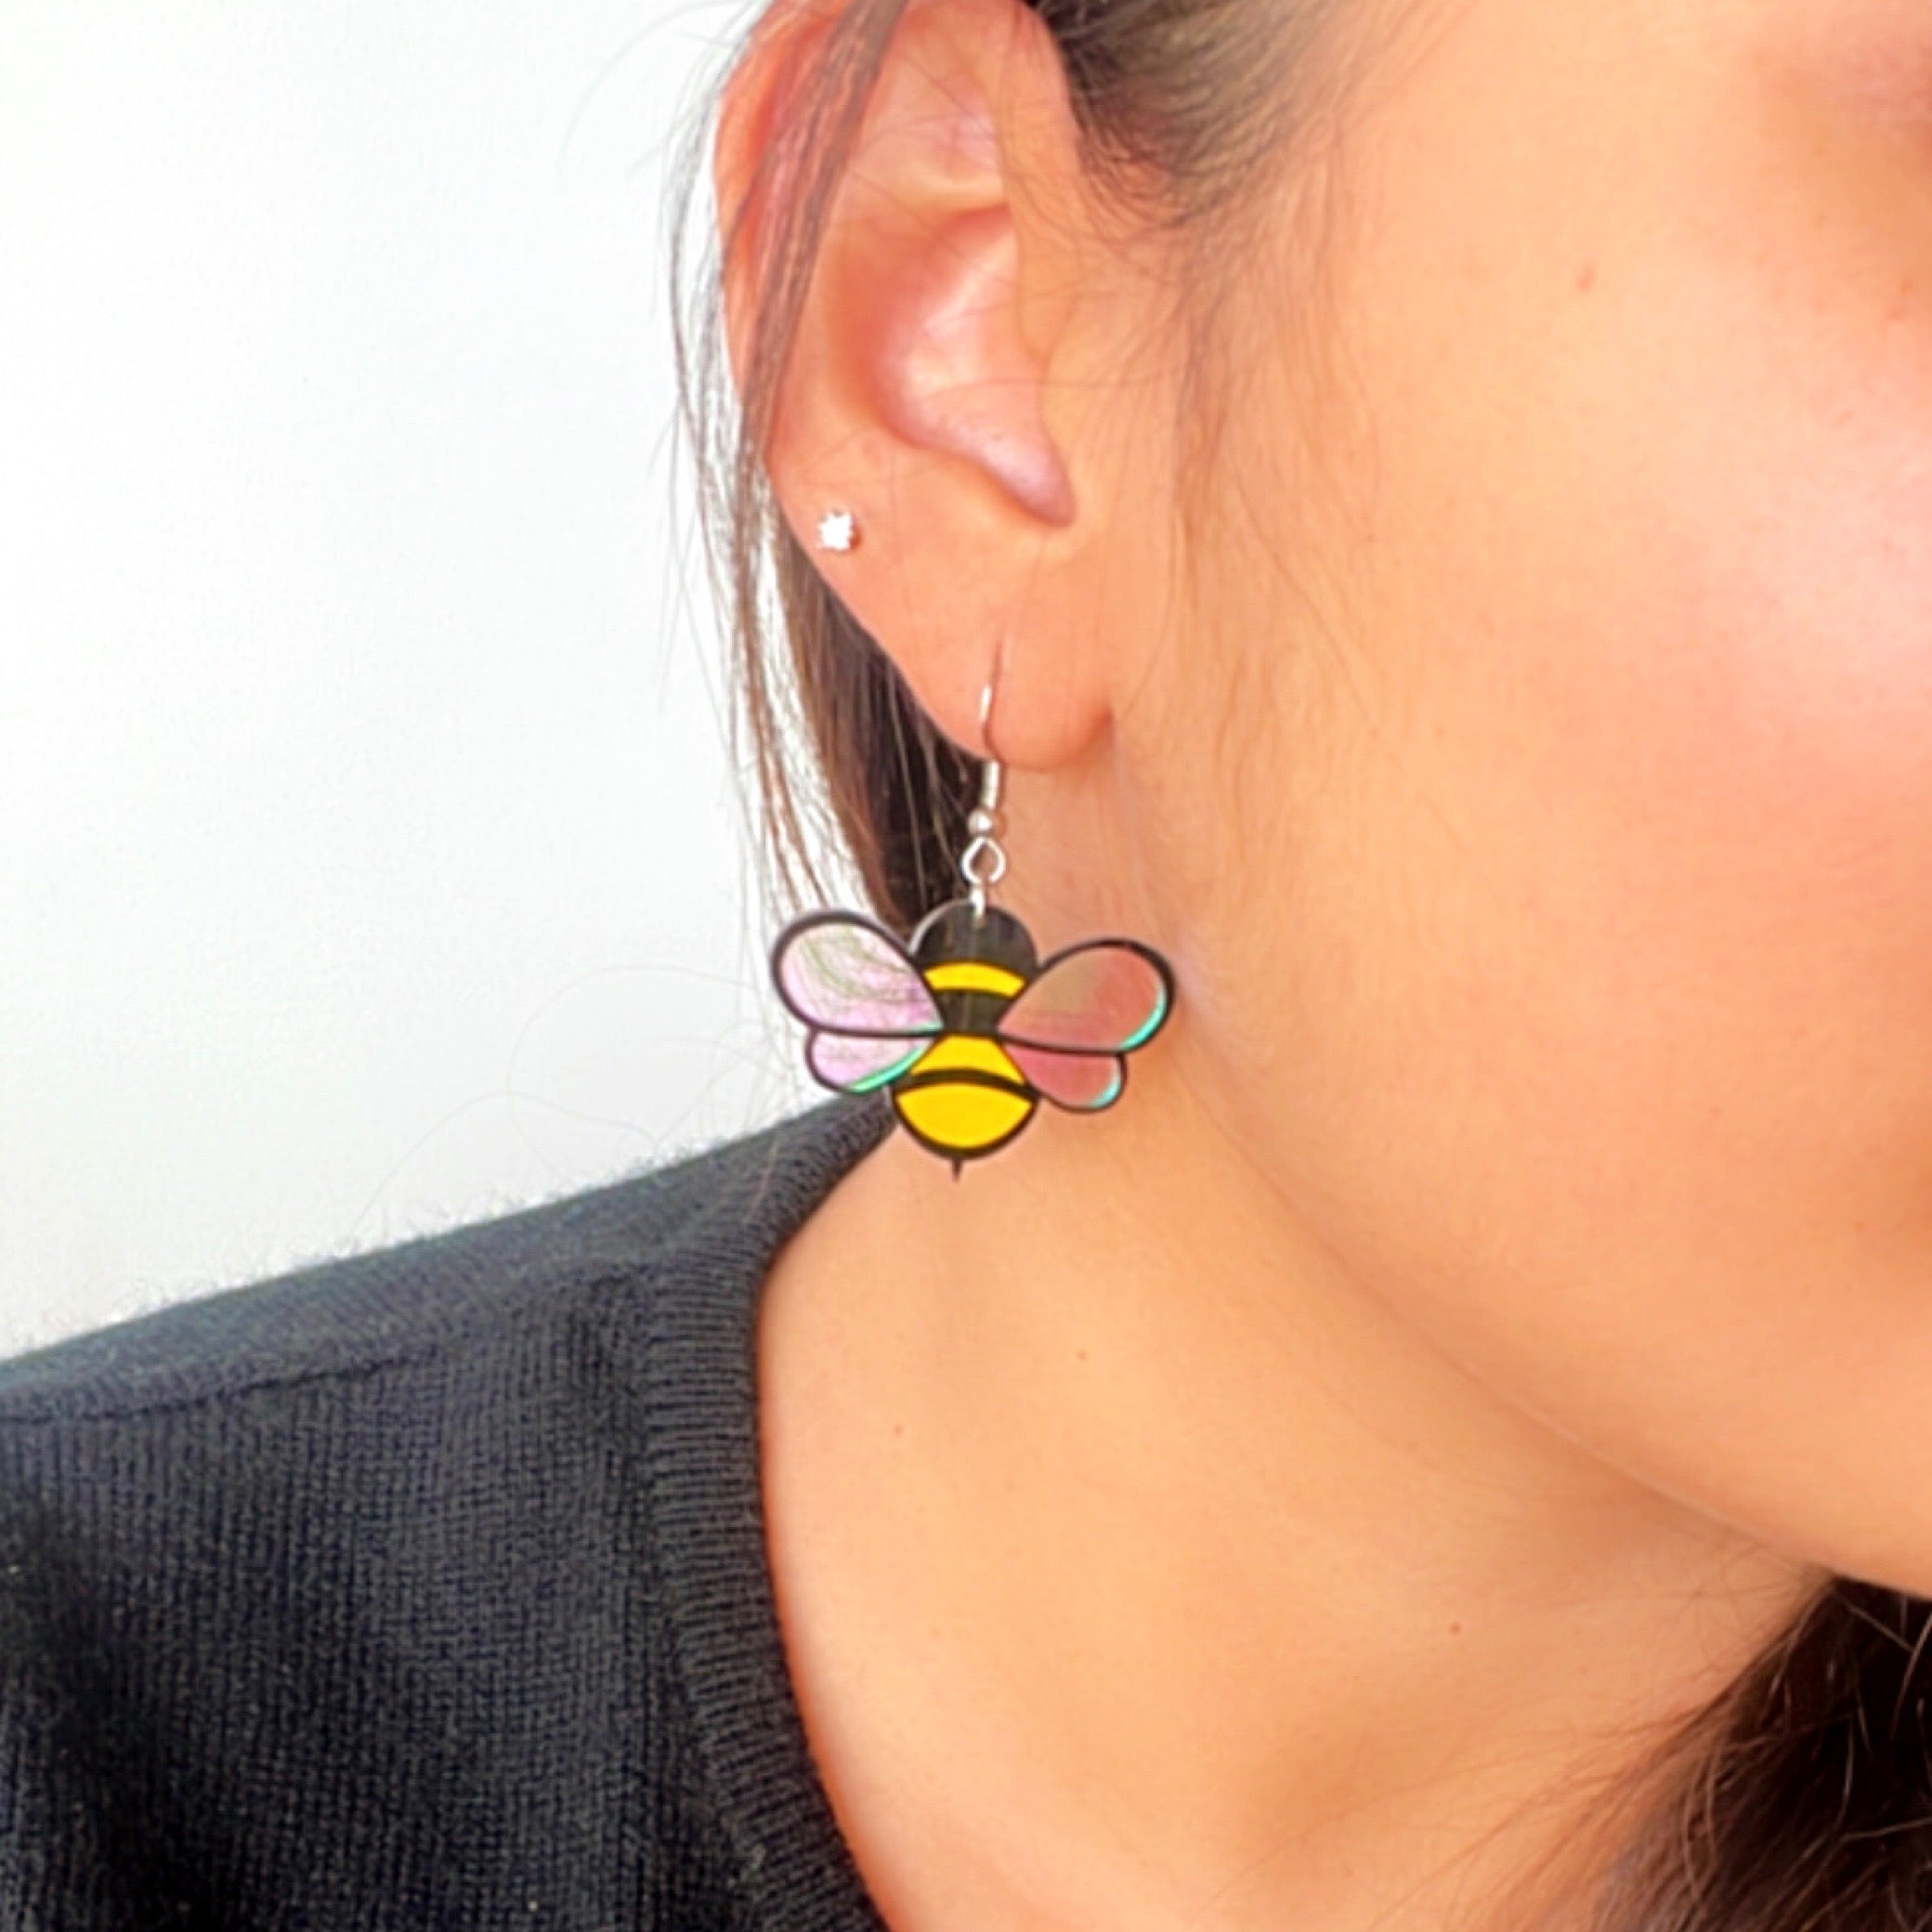 Baby Bee Earrings - Yellow and Black with a Holographin Effect - Nian by Nidhi - worn by a woman